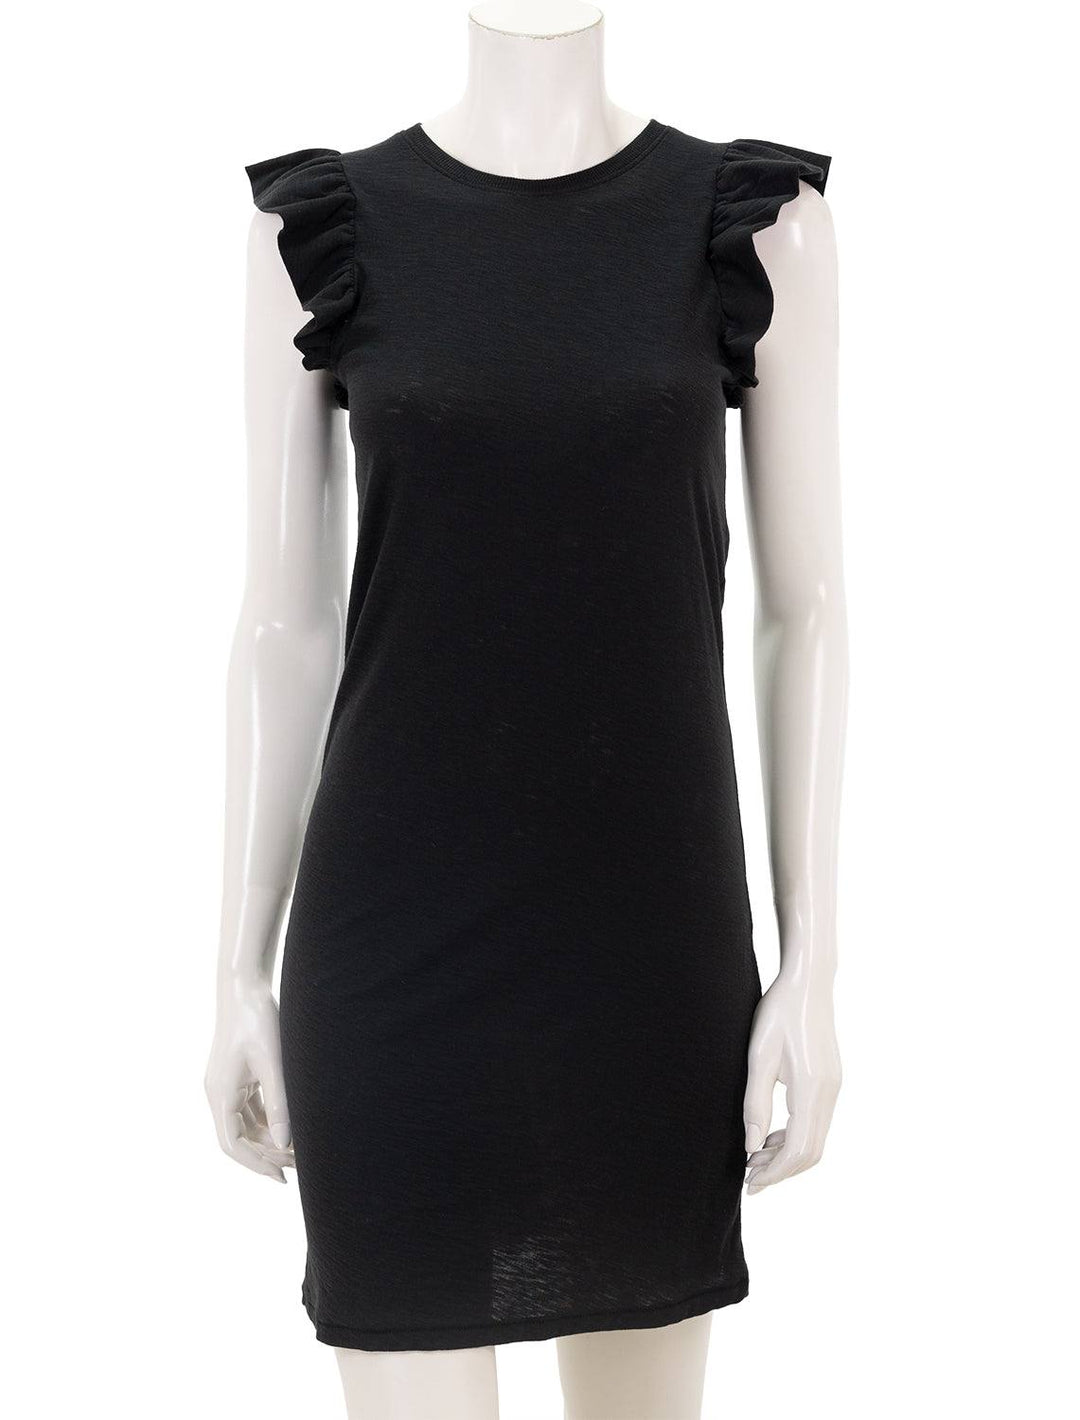 front view of elliot fused ruffle dress in black hemline hits above mid thigh